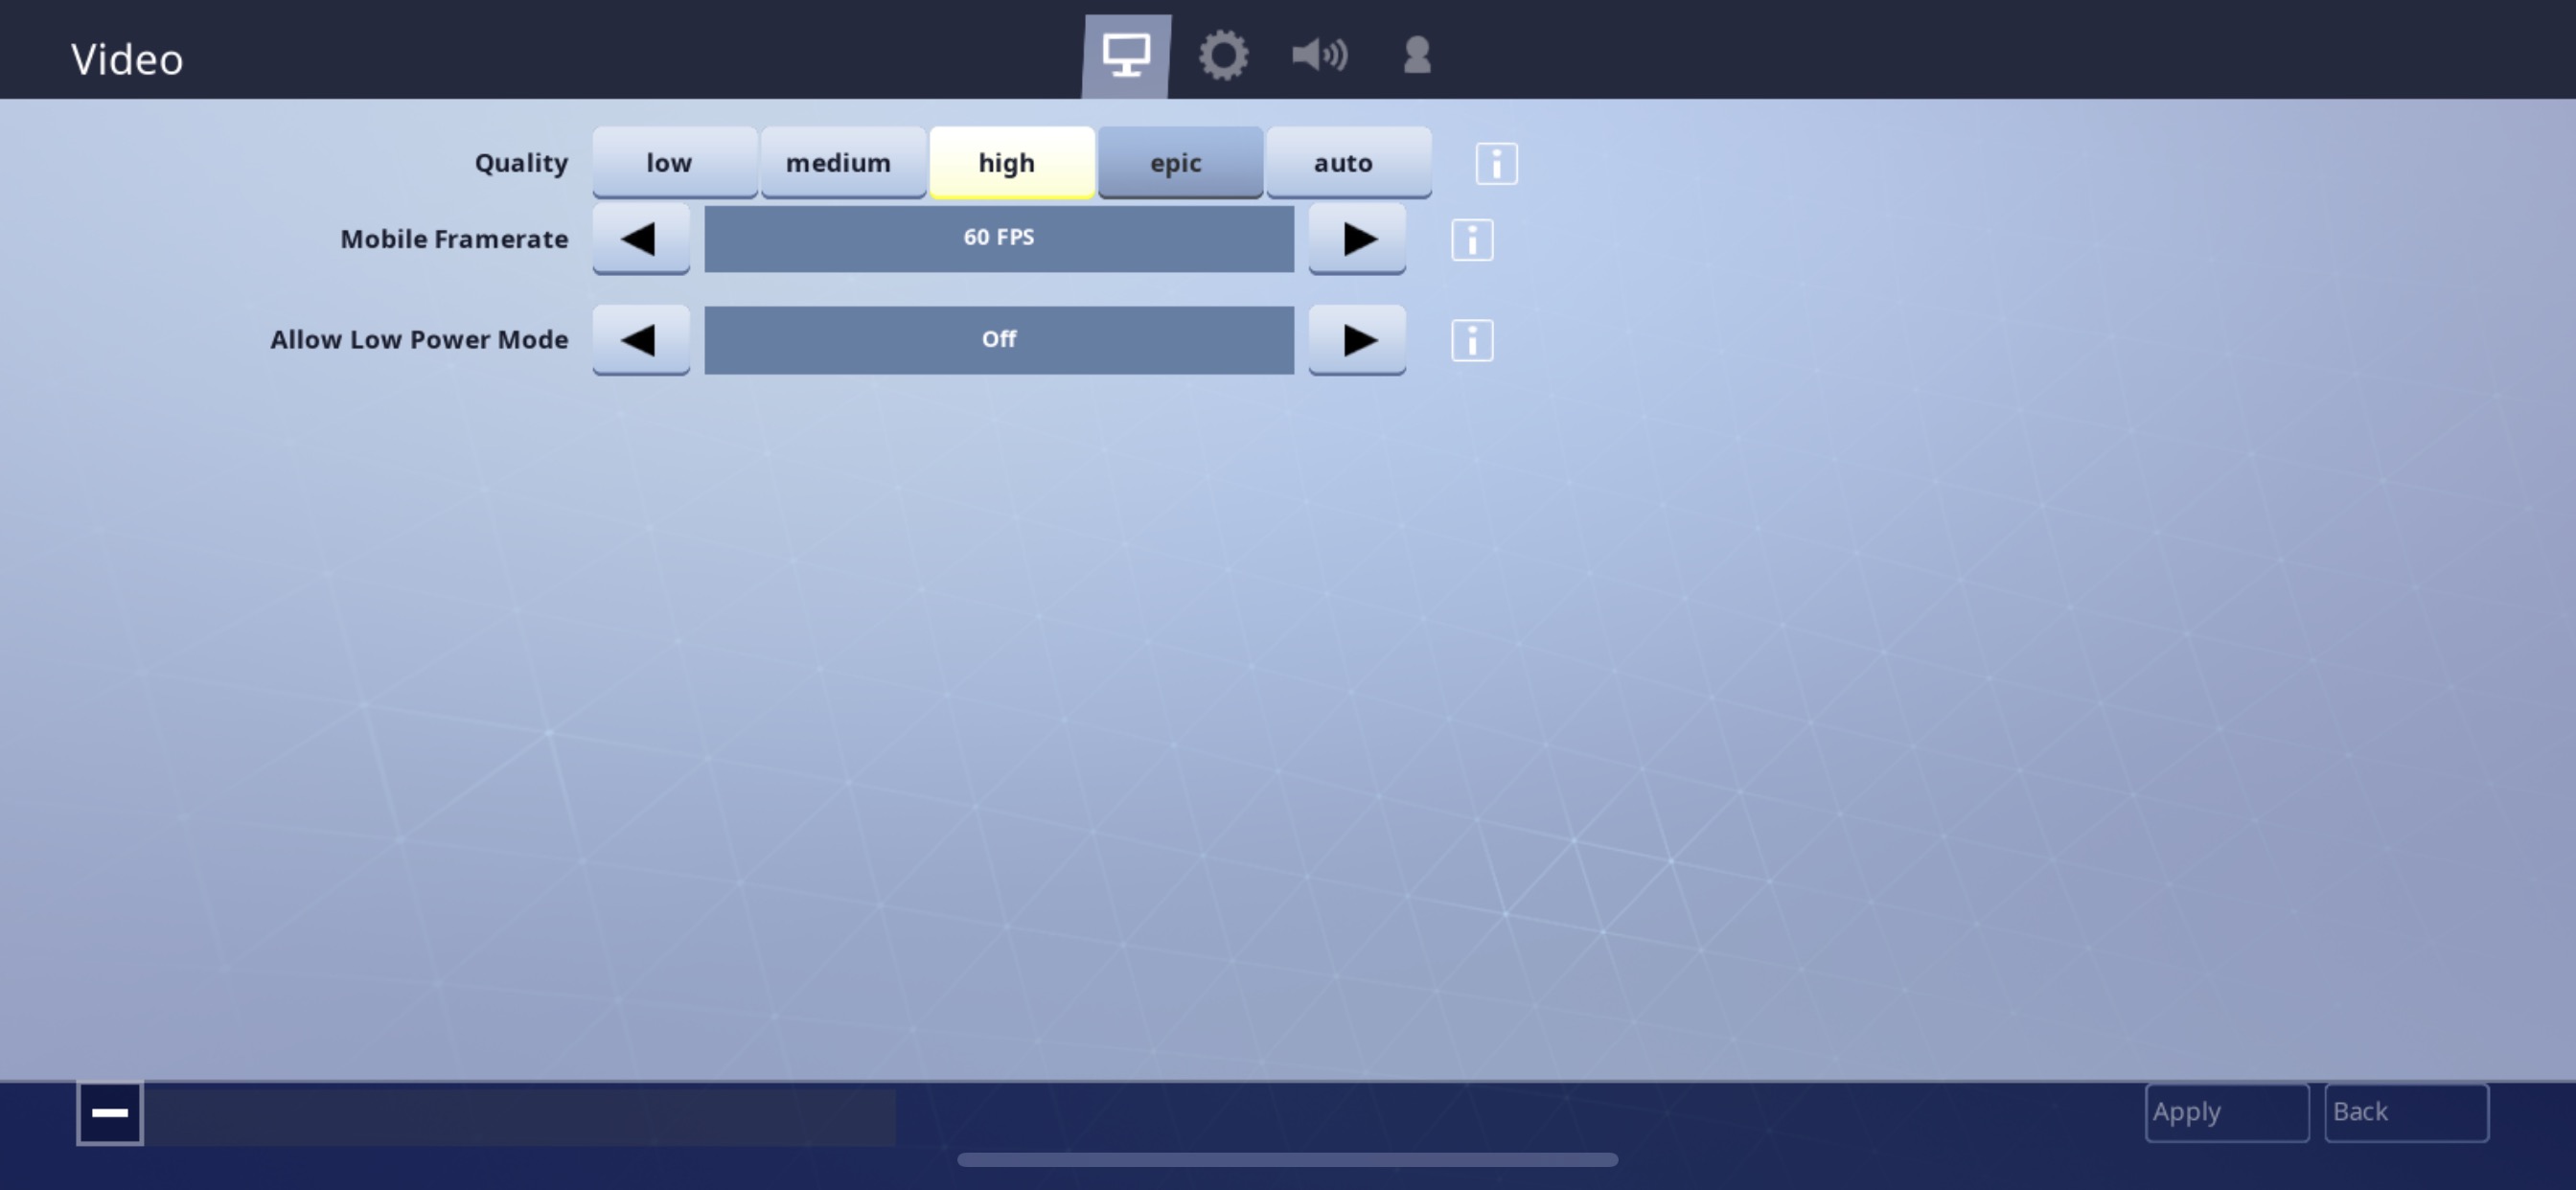 Fortnite Patch 6 31 Brings 60fps Gameplay To Select Ios Devices - c1ef0572 1989 4063 92c5 0b20cdad22f1 jpeg